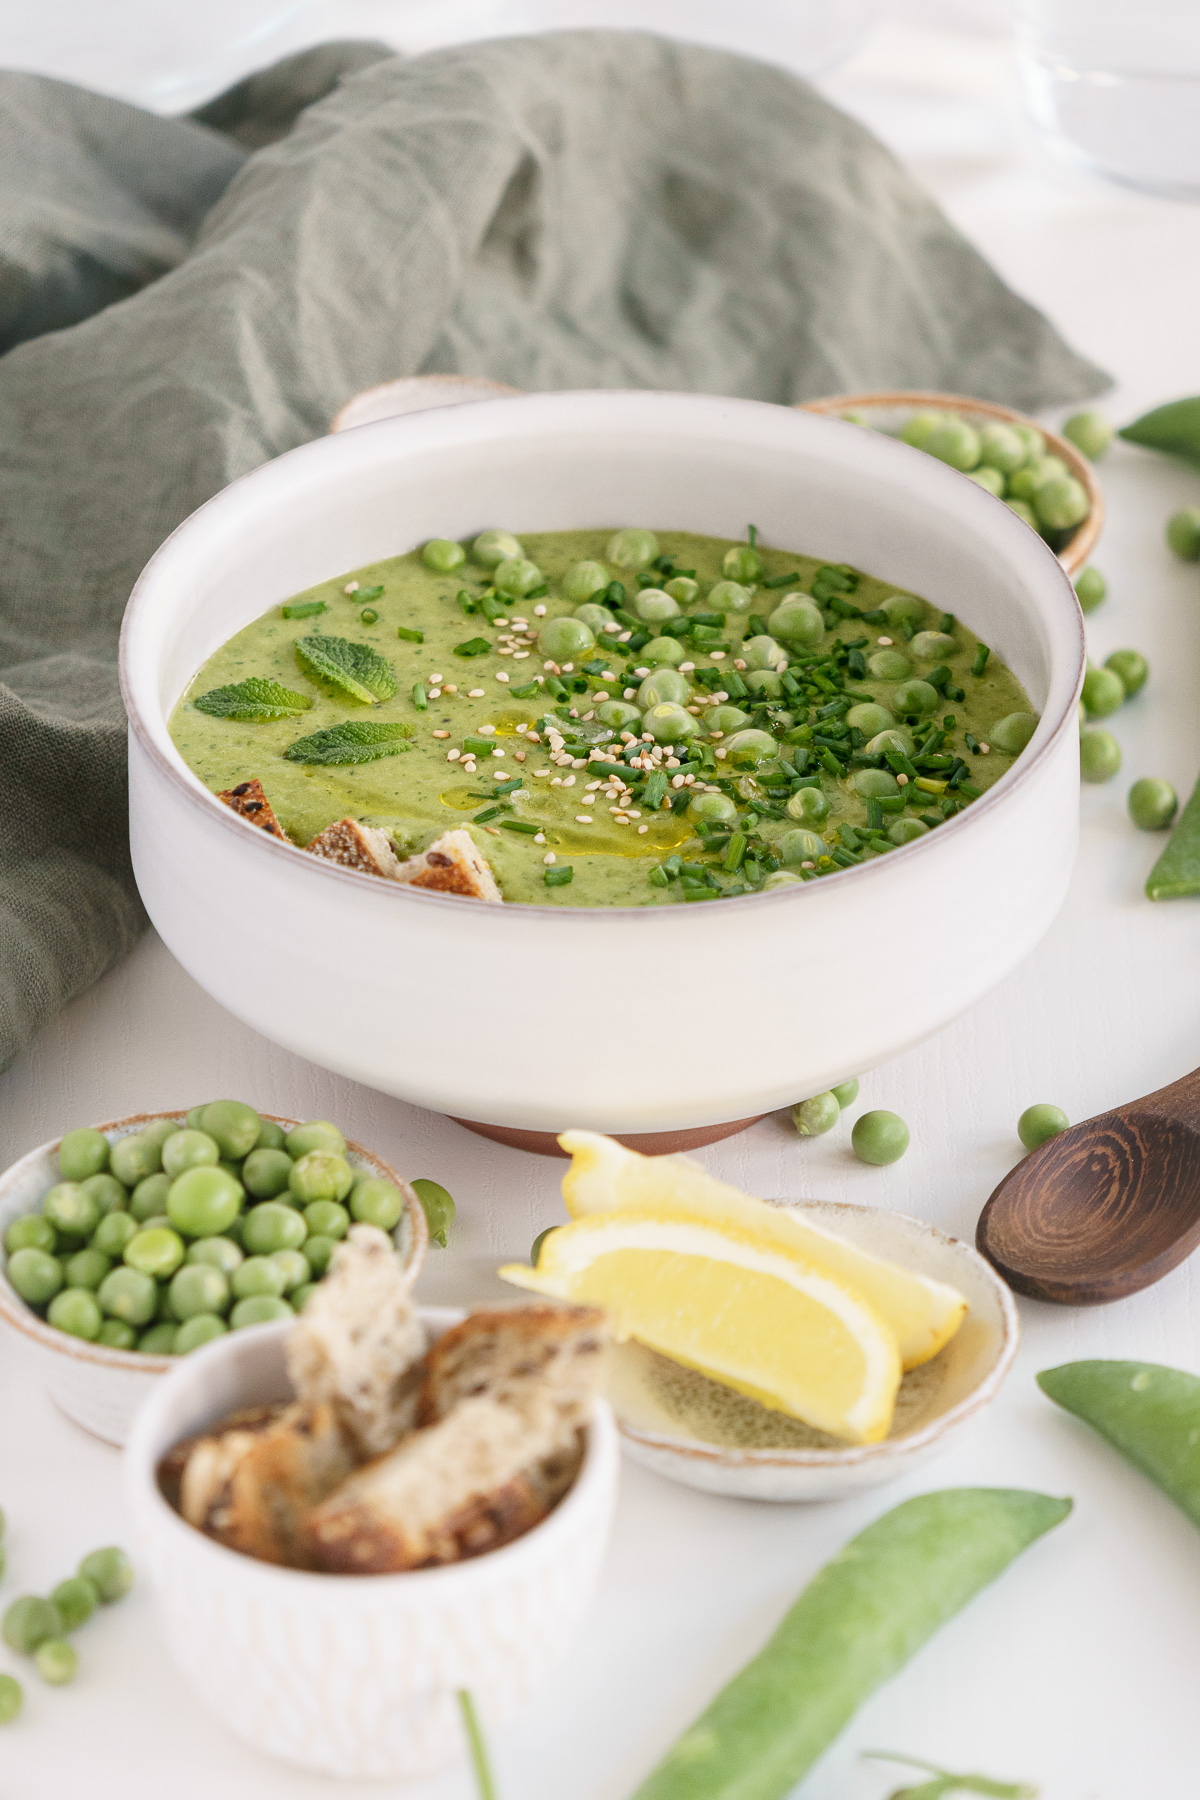 Bowl of fresh pea soup on the table with lemon wedges, croutons and a wooden spoon.